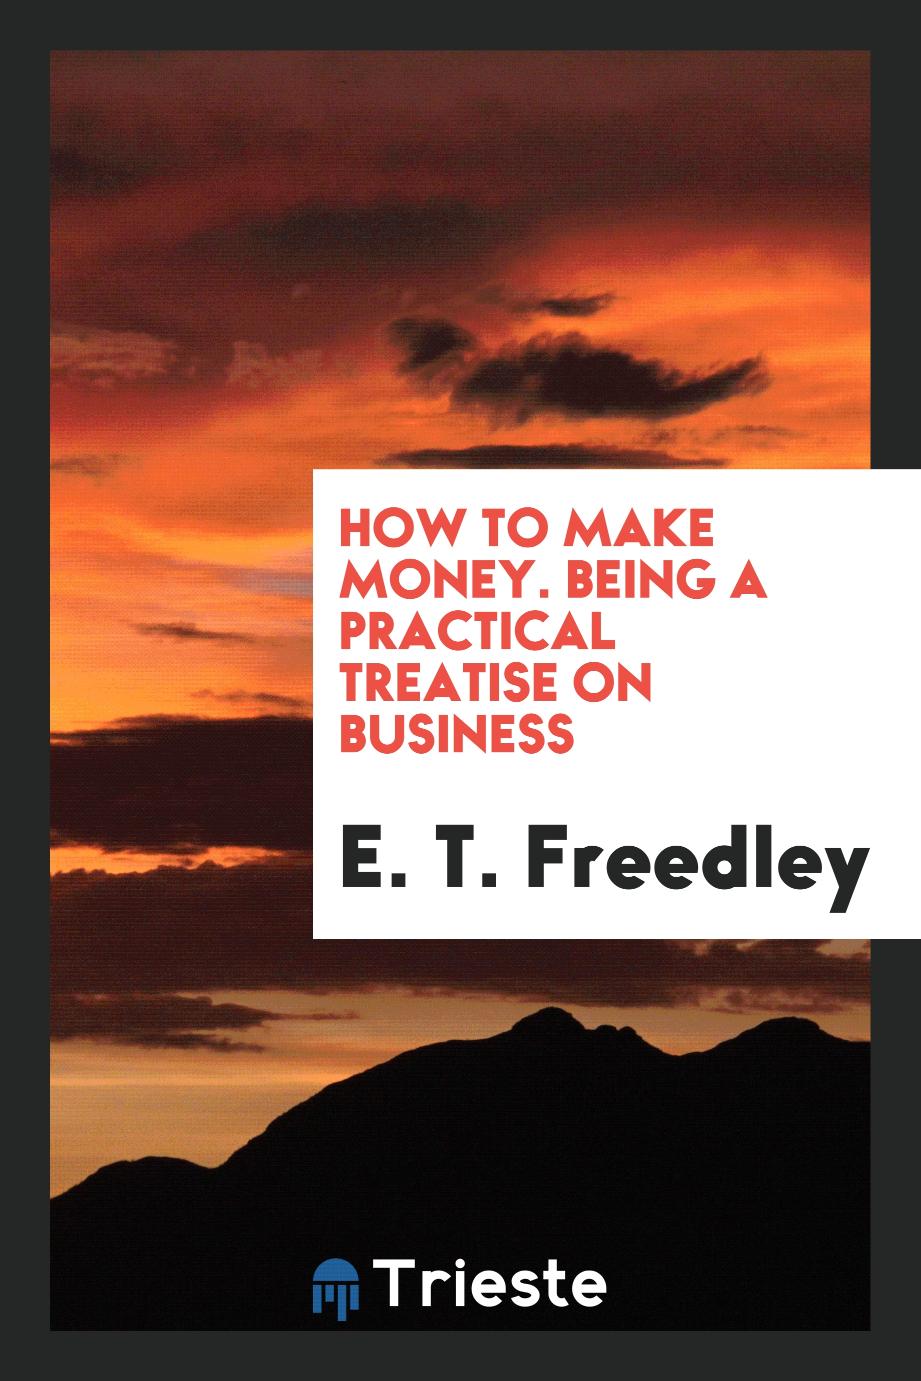 How to Make Money. Being a Practical Treatise on Business